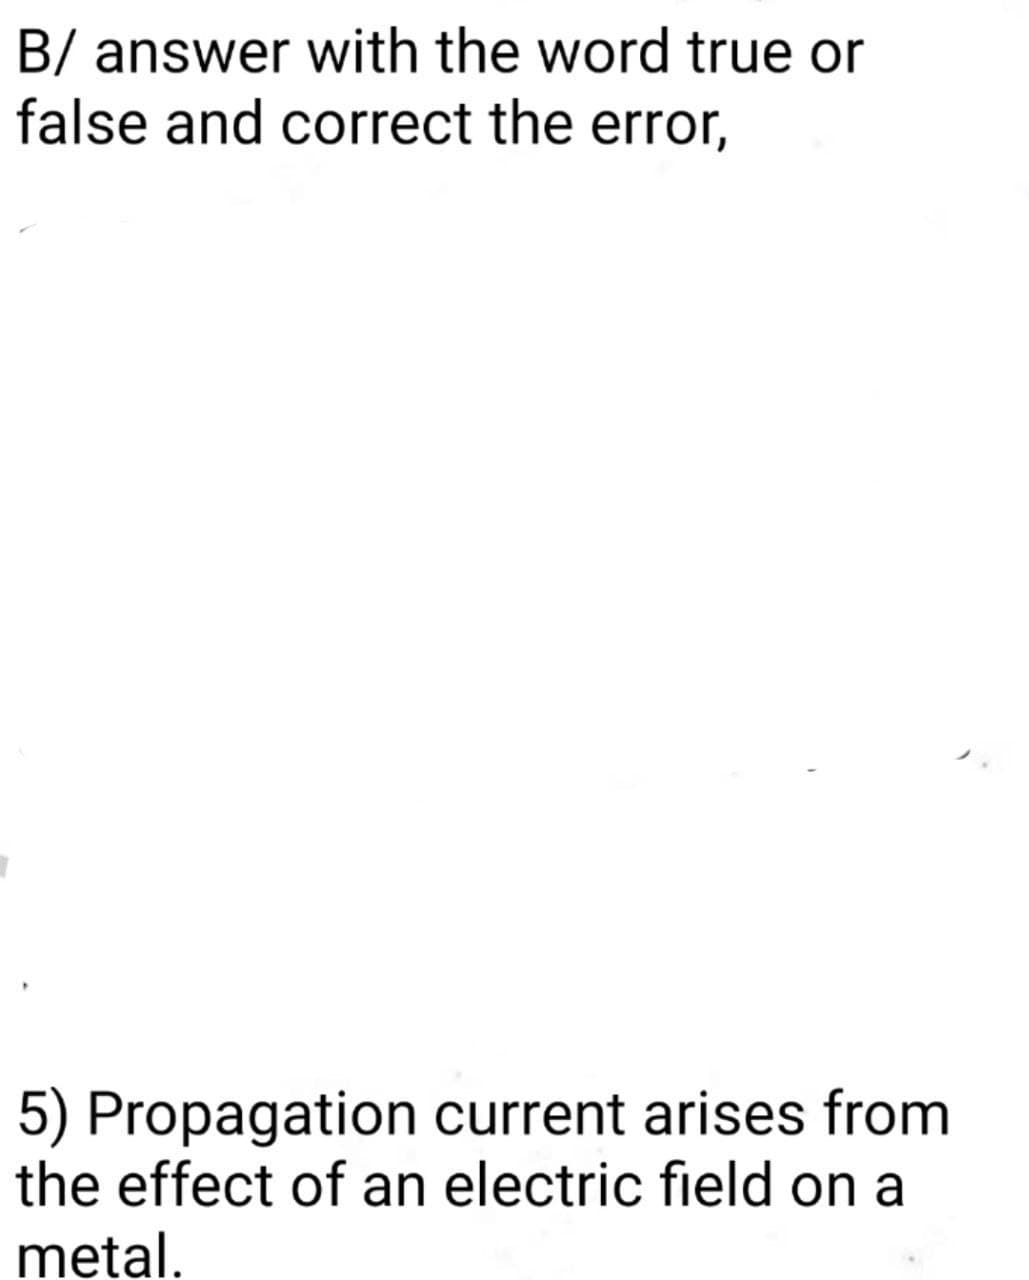 B/ answer with the word true or
false and correct the error,
5) Propagation current arises from
the effect of an electric field on a
metal.
